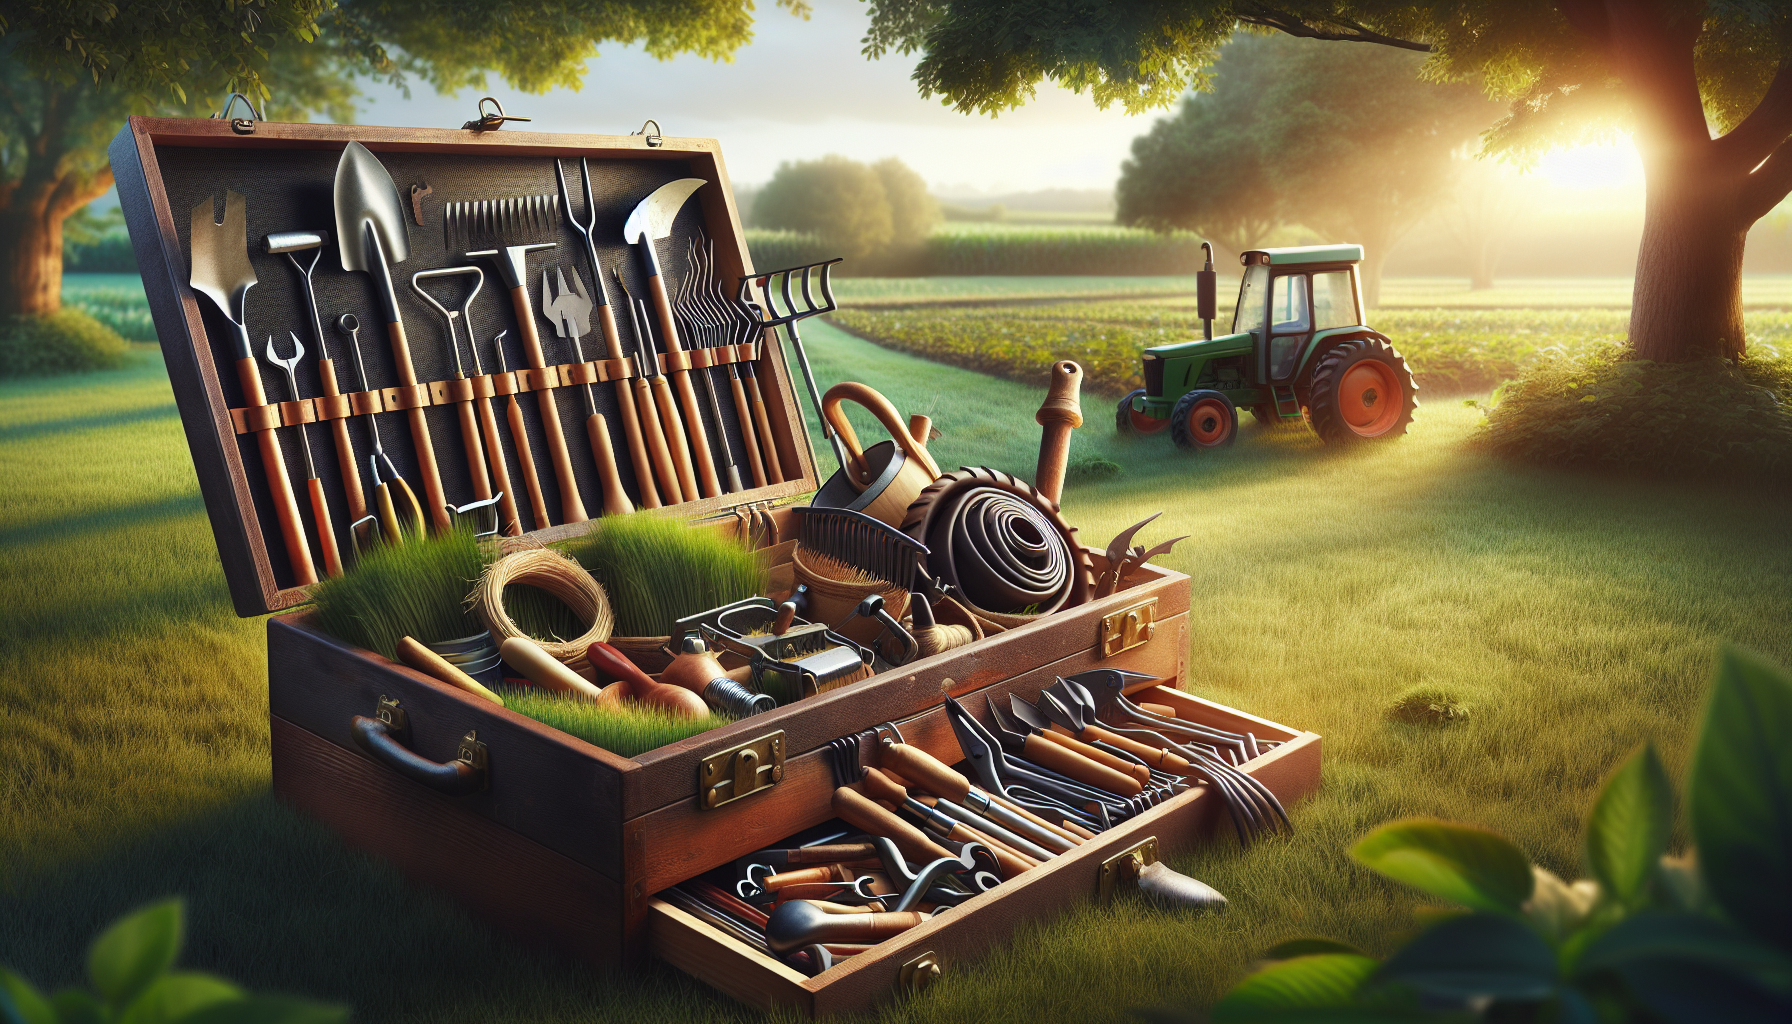 How To Choose The Best Farm Tools For Your Needs